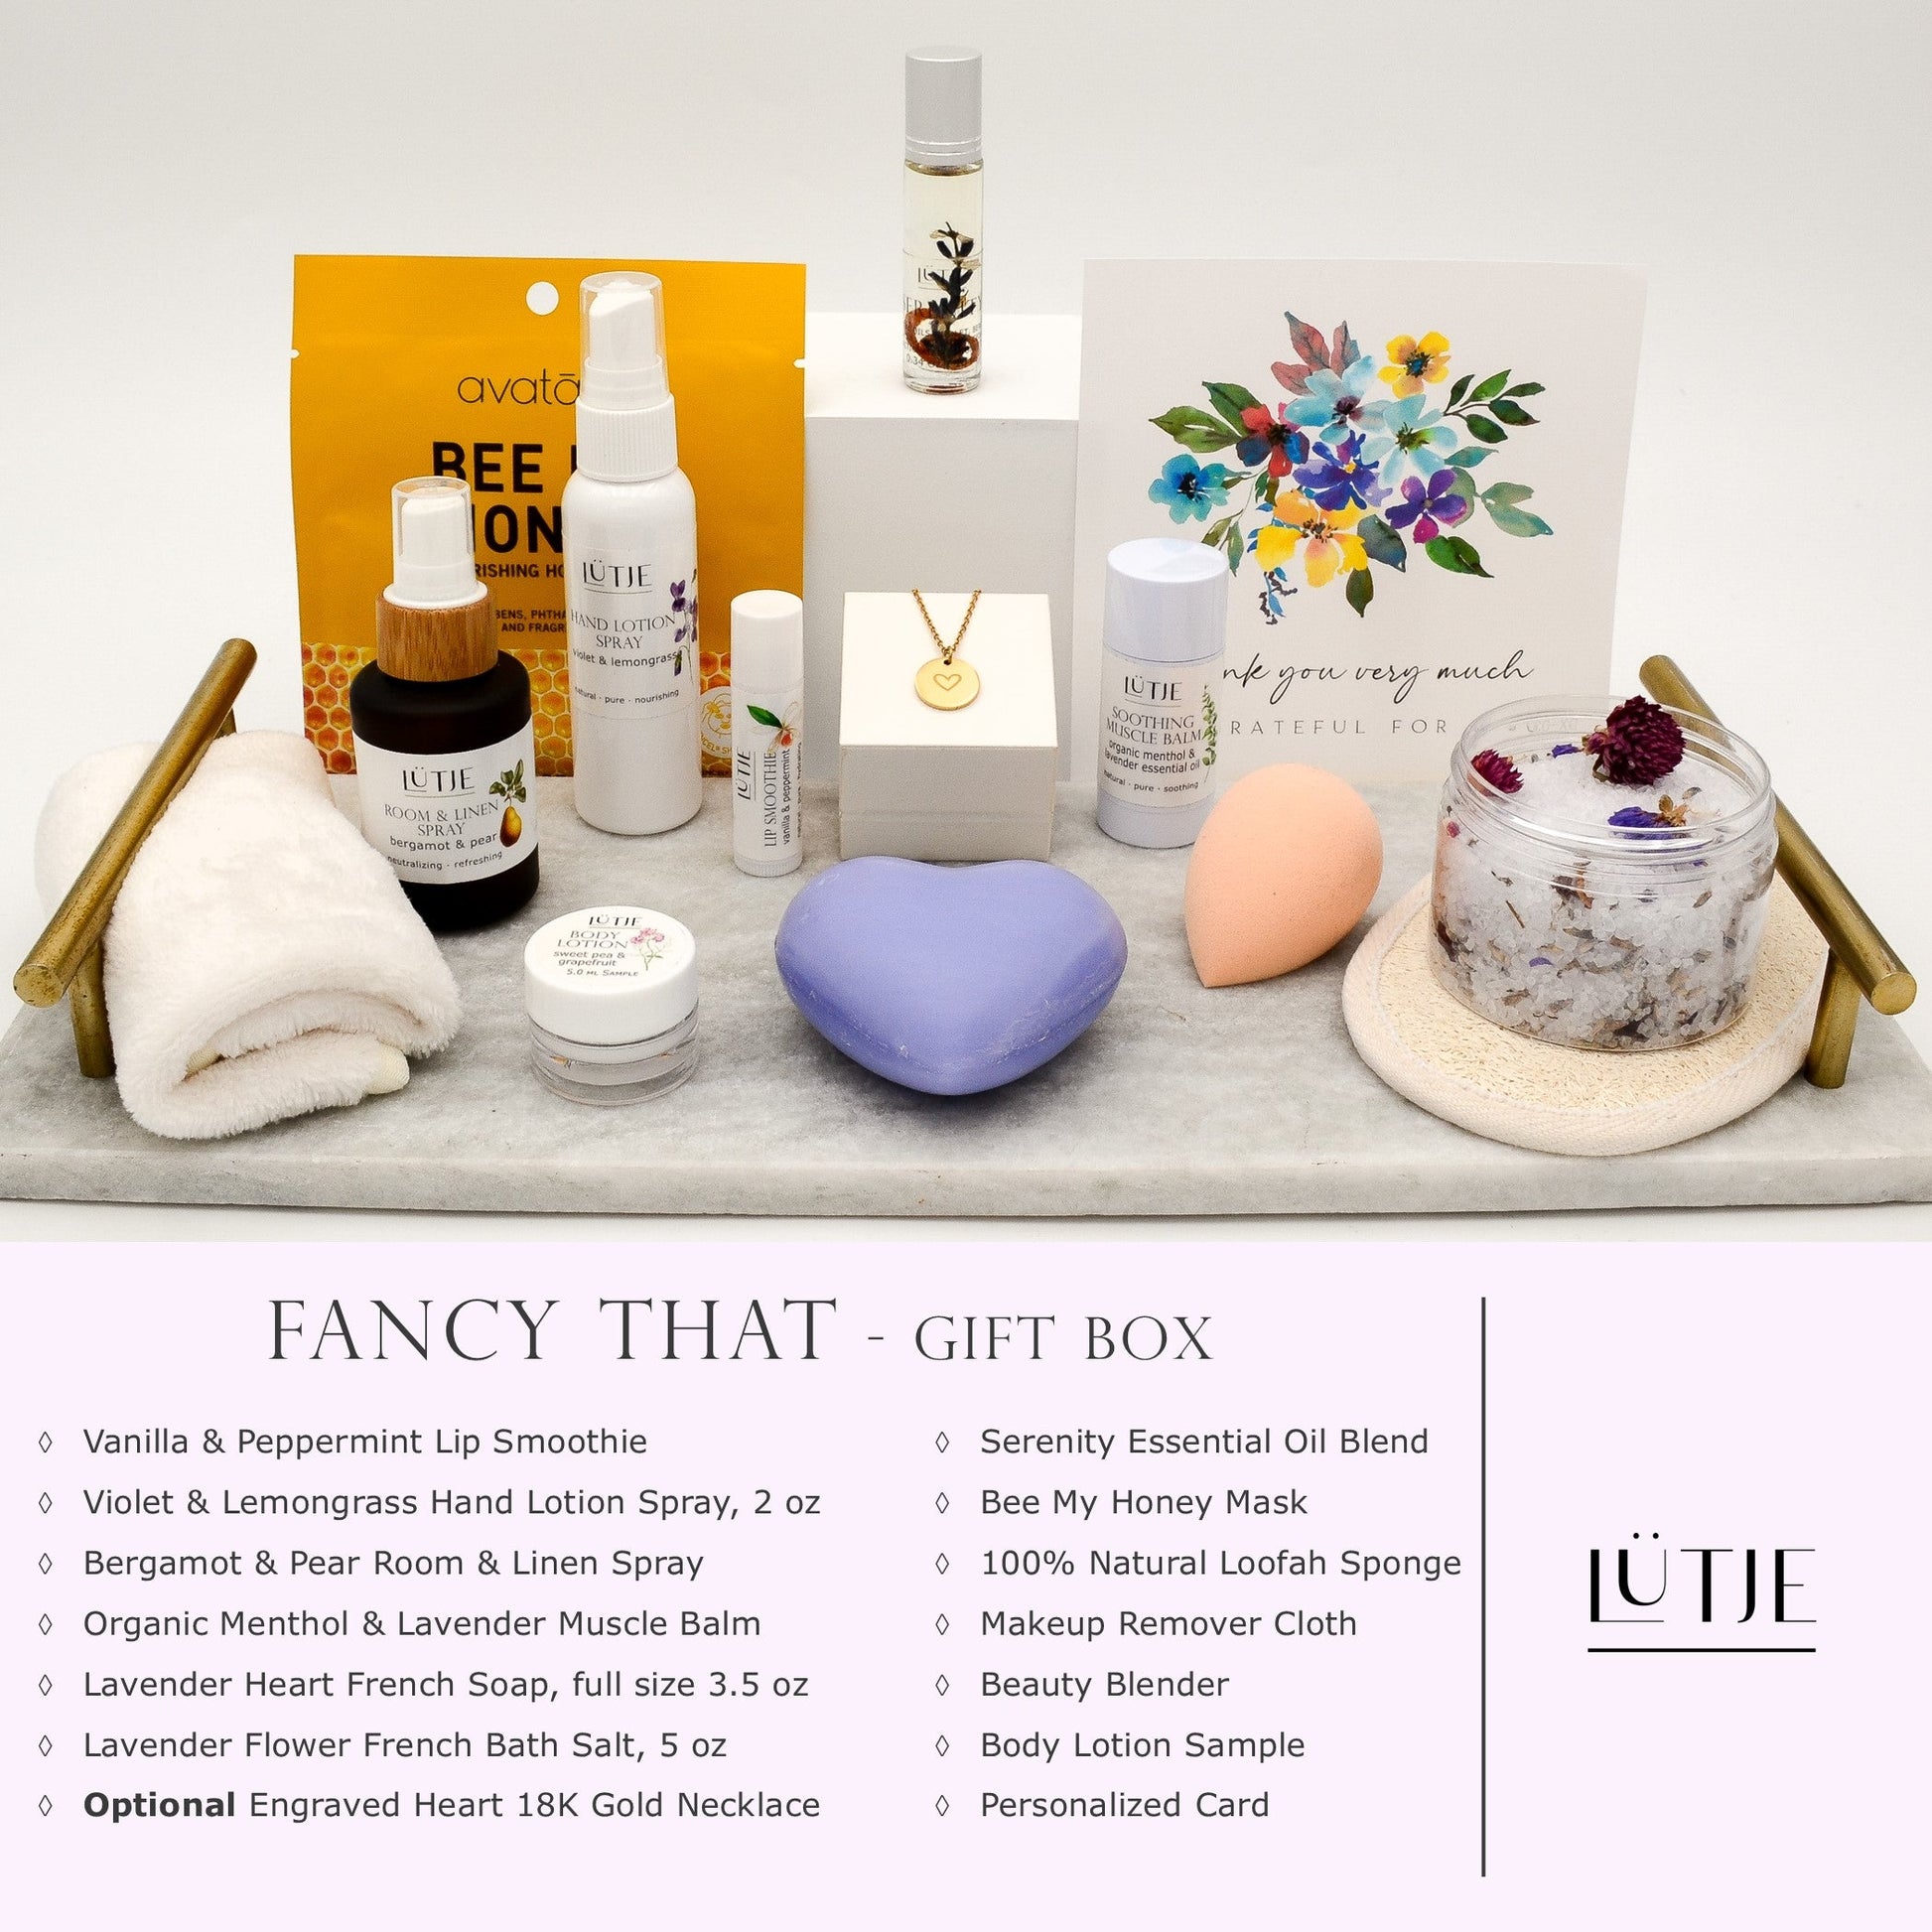 Fancy That Gift Box for women, BFF, wife, daughter, sister, mom, or grandma, includes Violet & Lemongrass hand lotion spray, essential oil, lip balm, soothing muscle balm, Bergamot & Pear room & linen spray, French soap, French bath salts, hydrating face mask, other bath, spa and self-care items, and optional 18K gold-plated necklace with engraved heart.